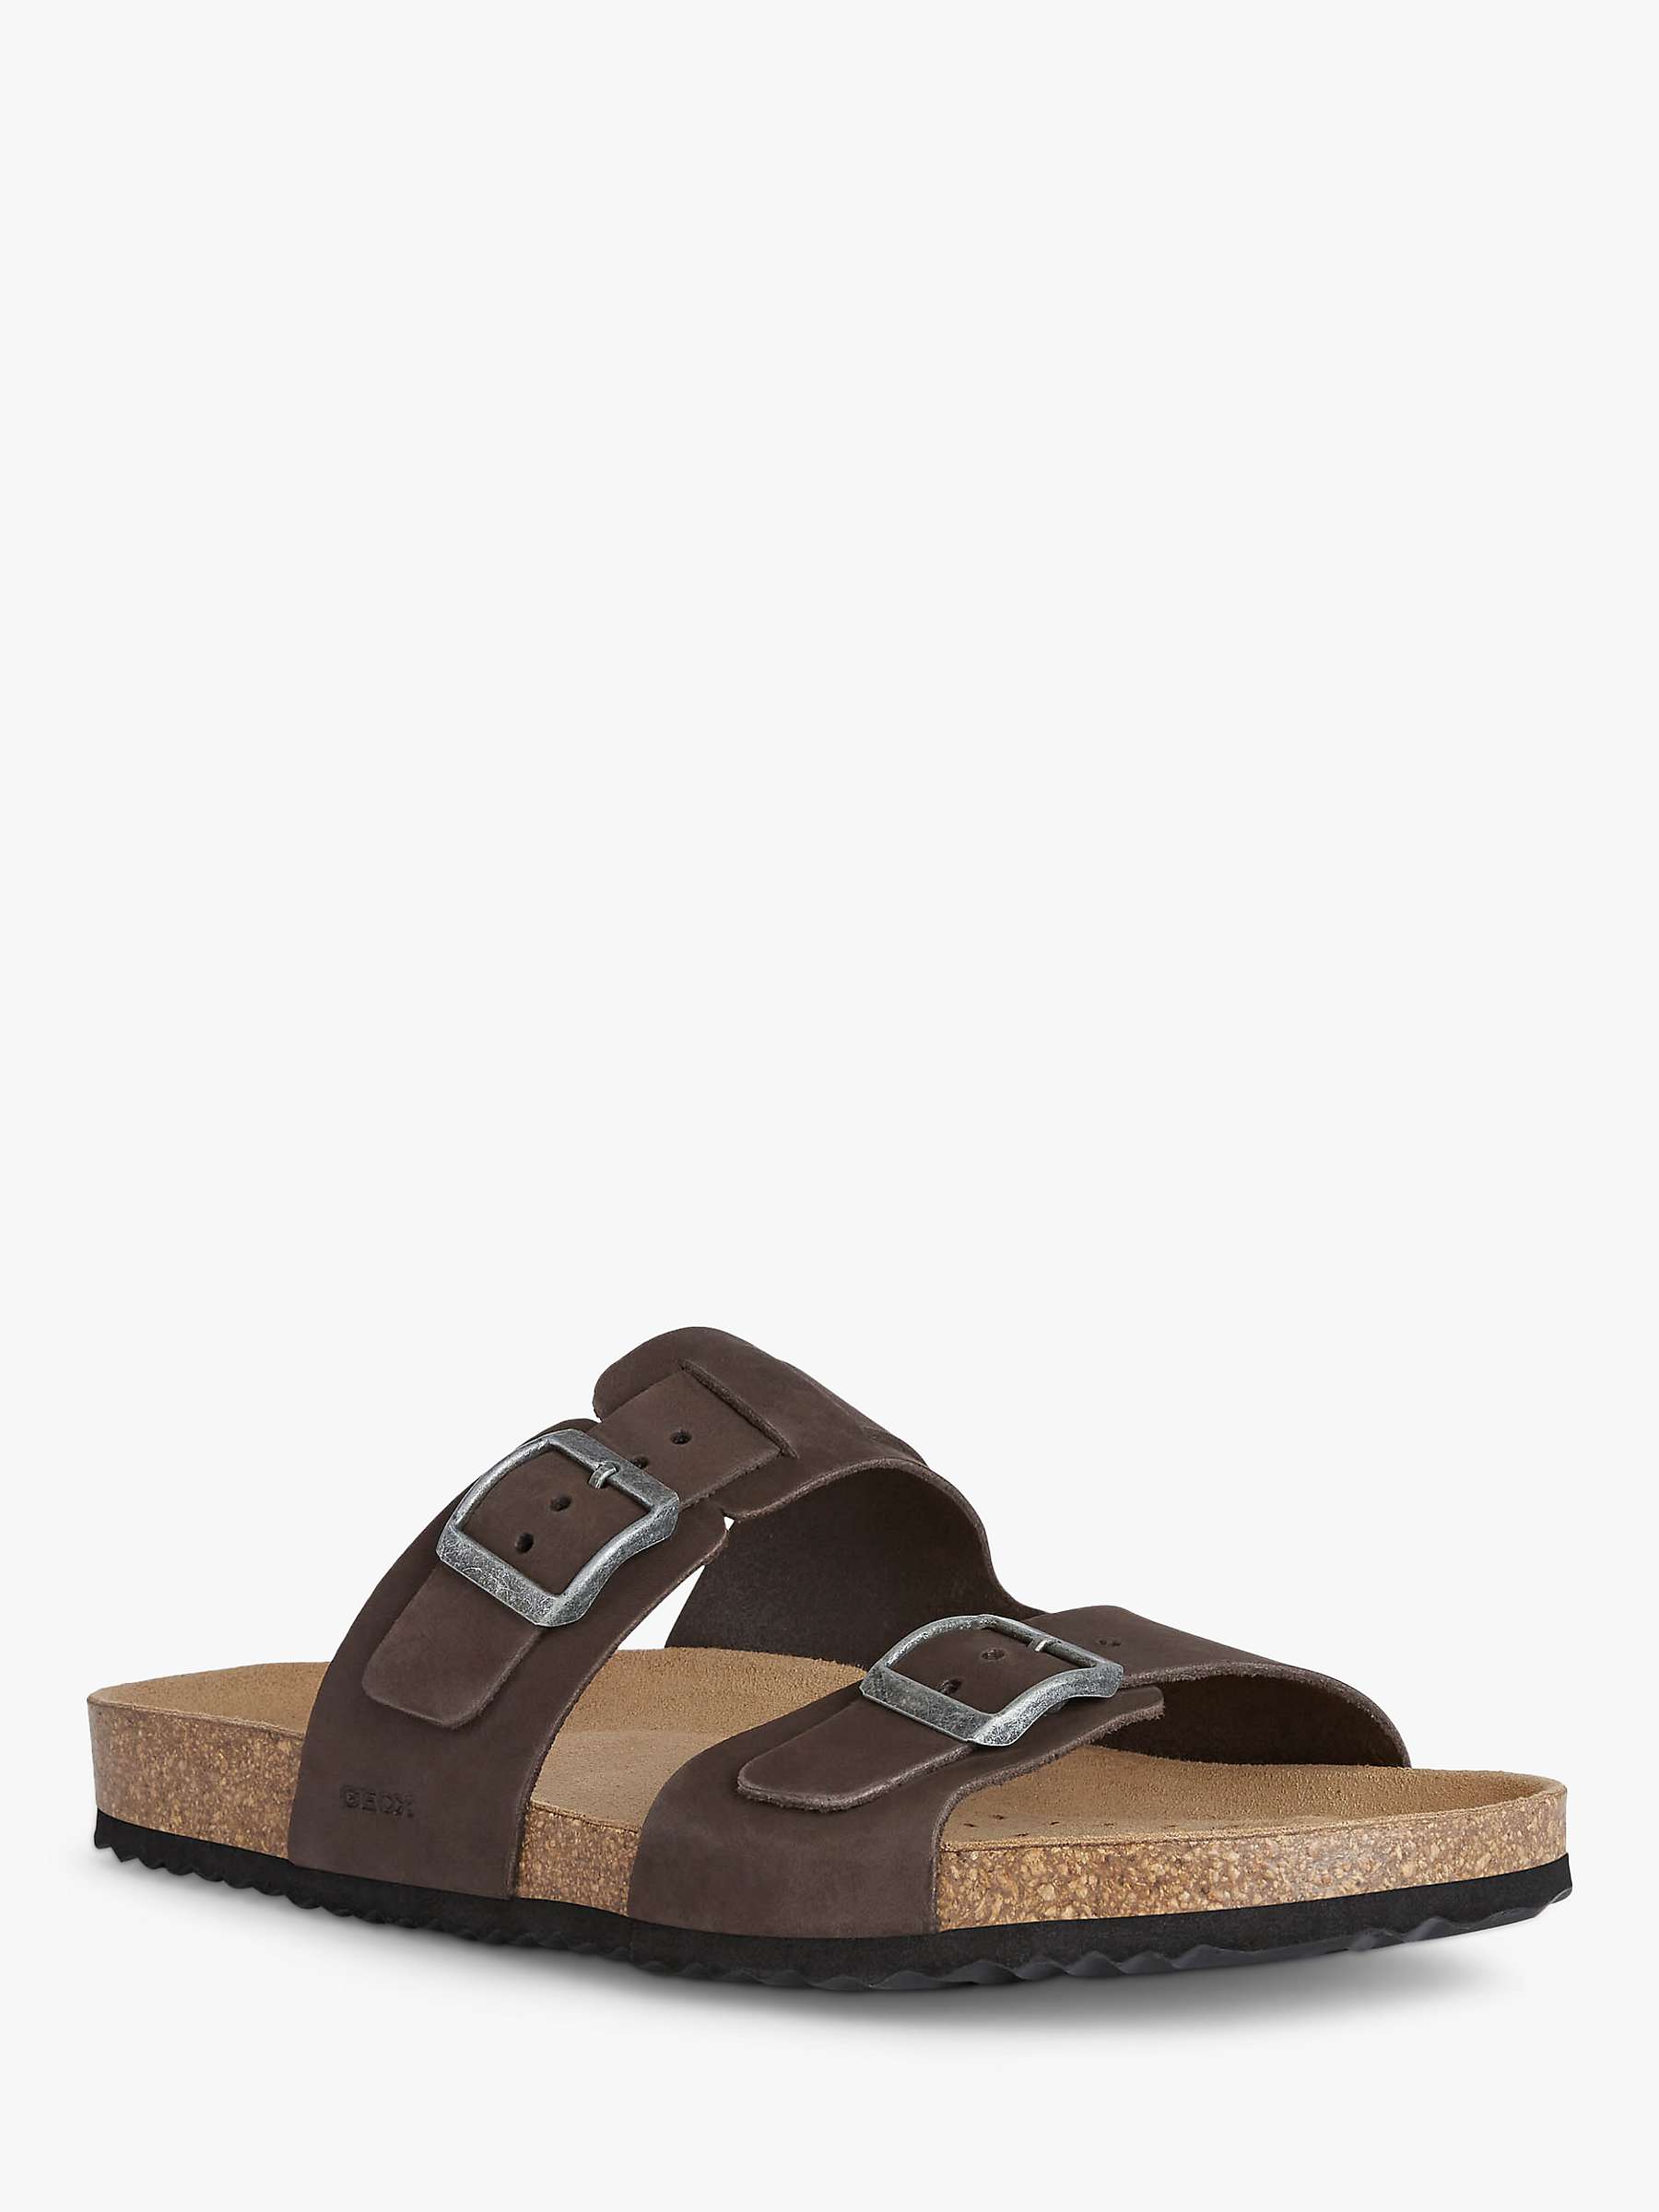 Buy Geox Ghita Leather Footbed Sandals Online at johnlewis.com